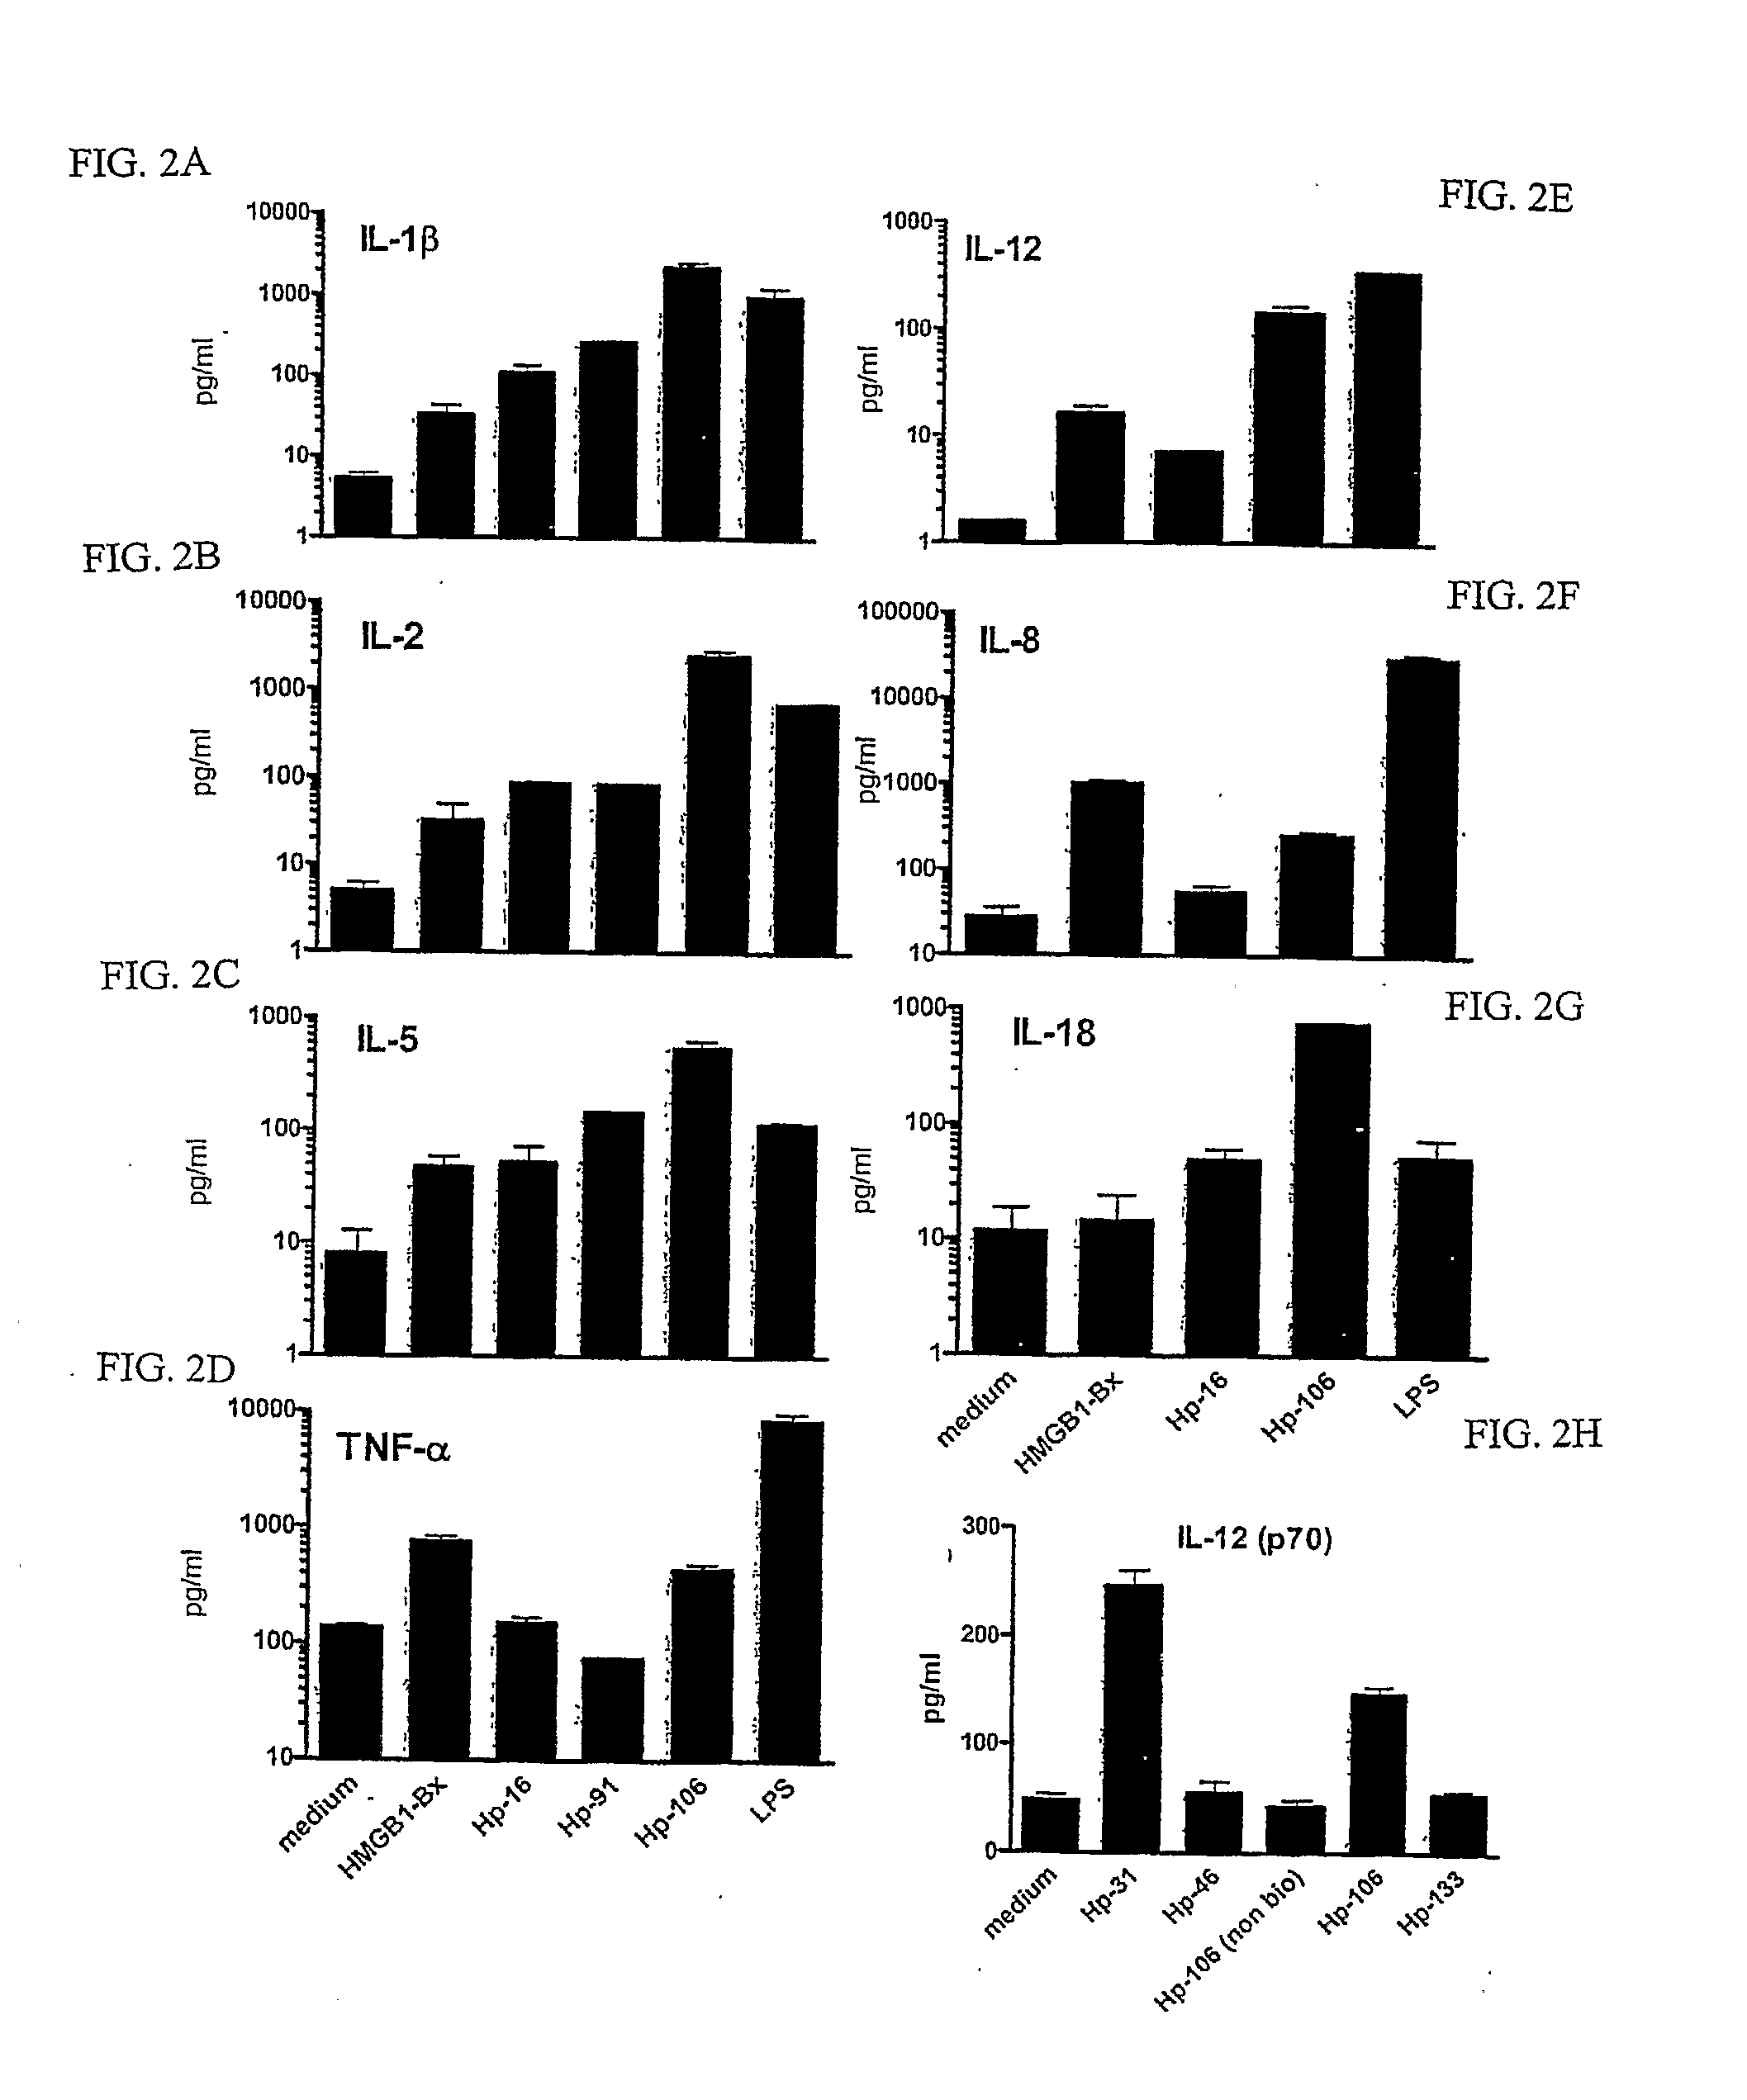 Antibodies Against Hmgb1 and Fragments Thereof